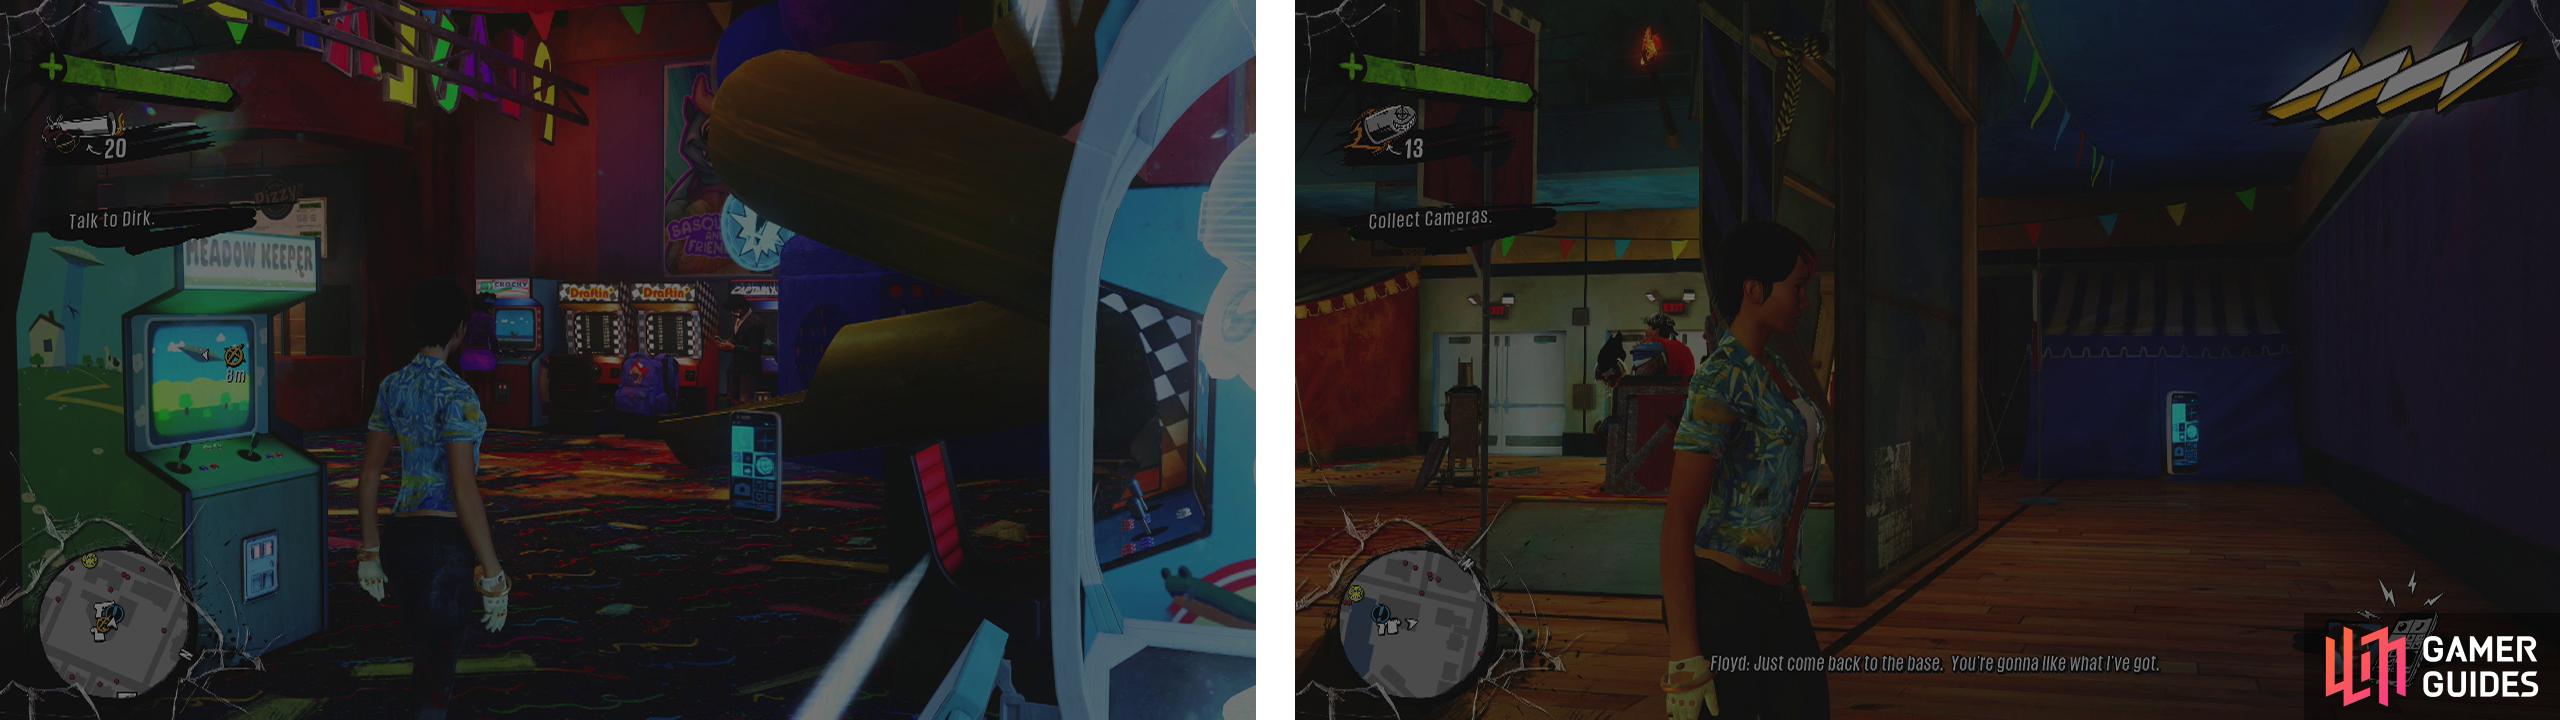 Easy smartphones to find include those located inside the Oxford’s Base (left) and the Fargathian base (right)